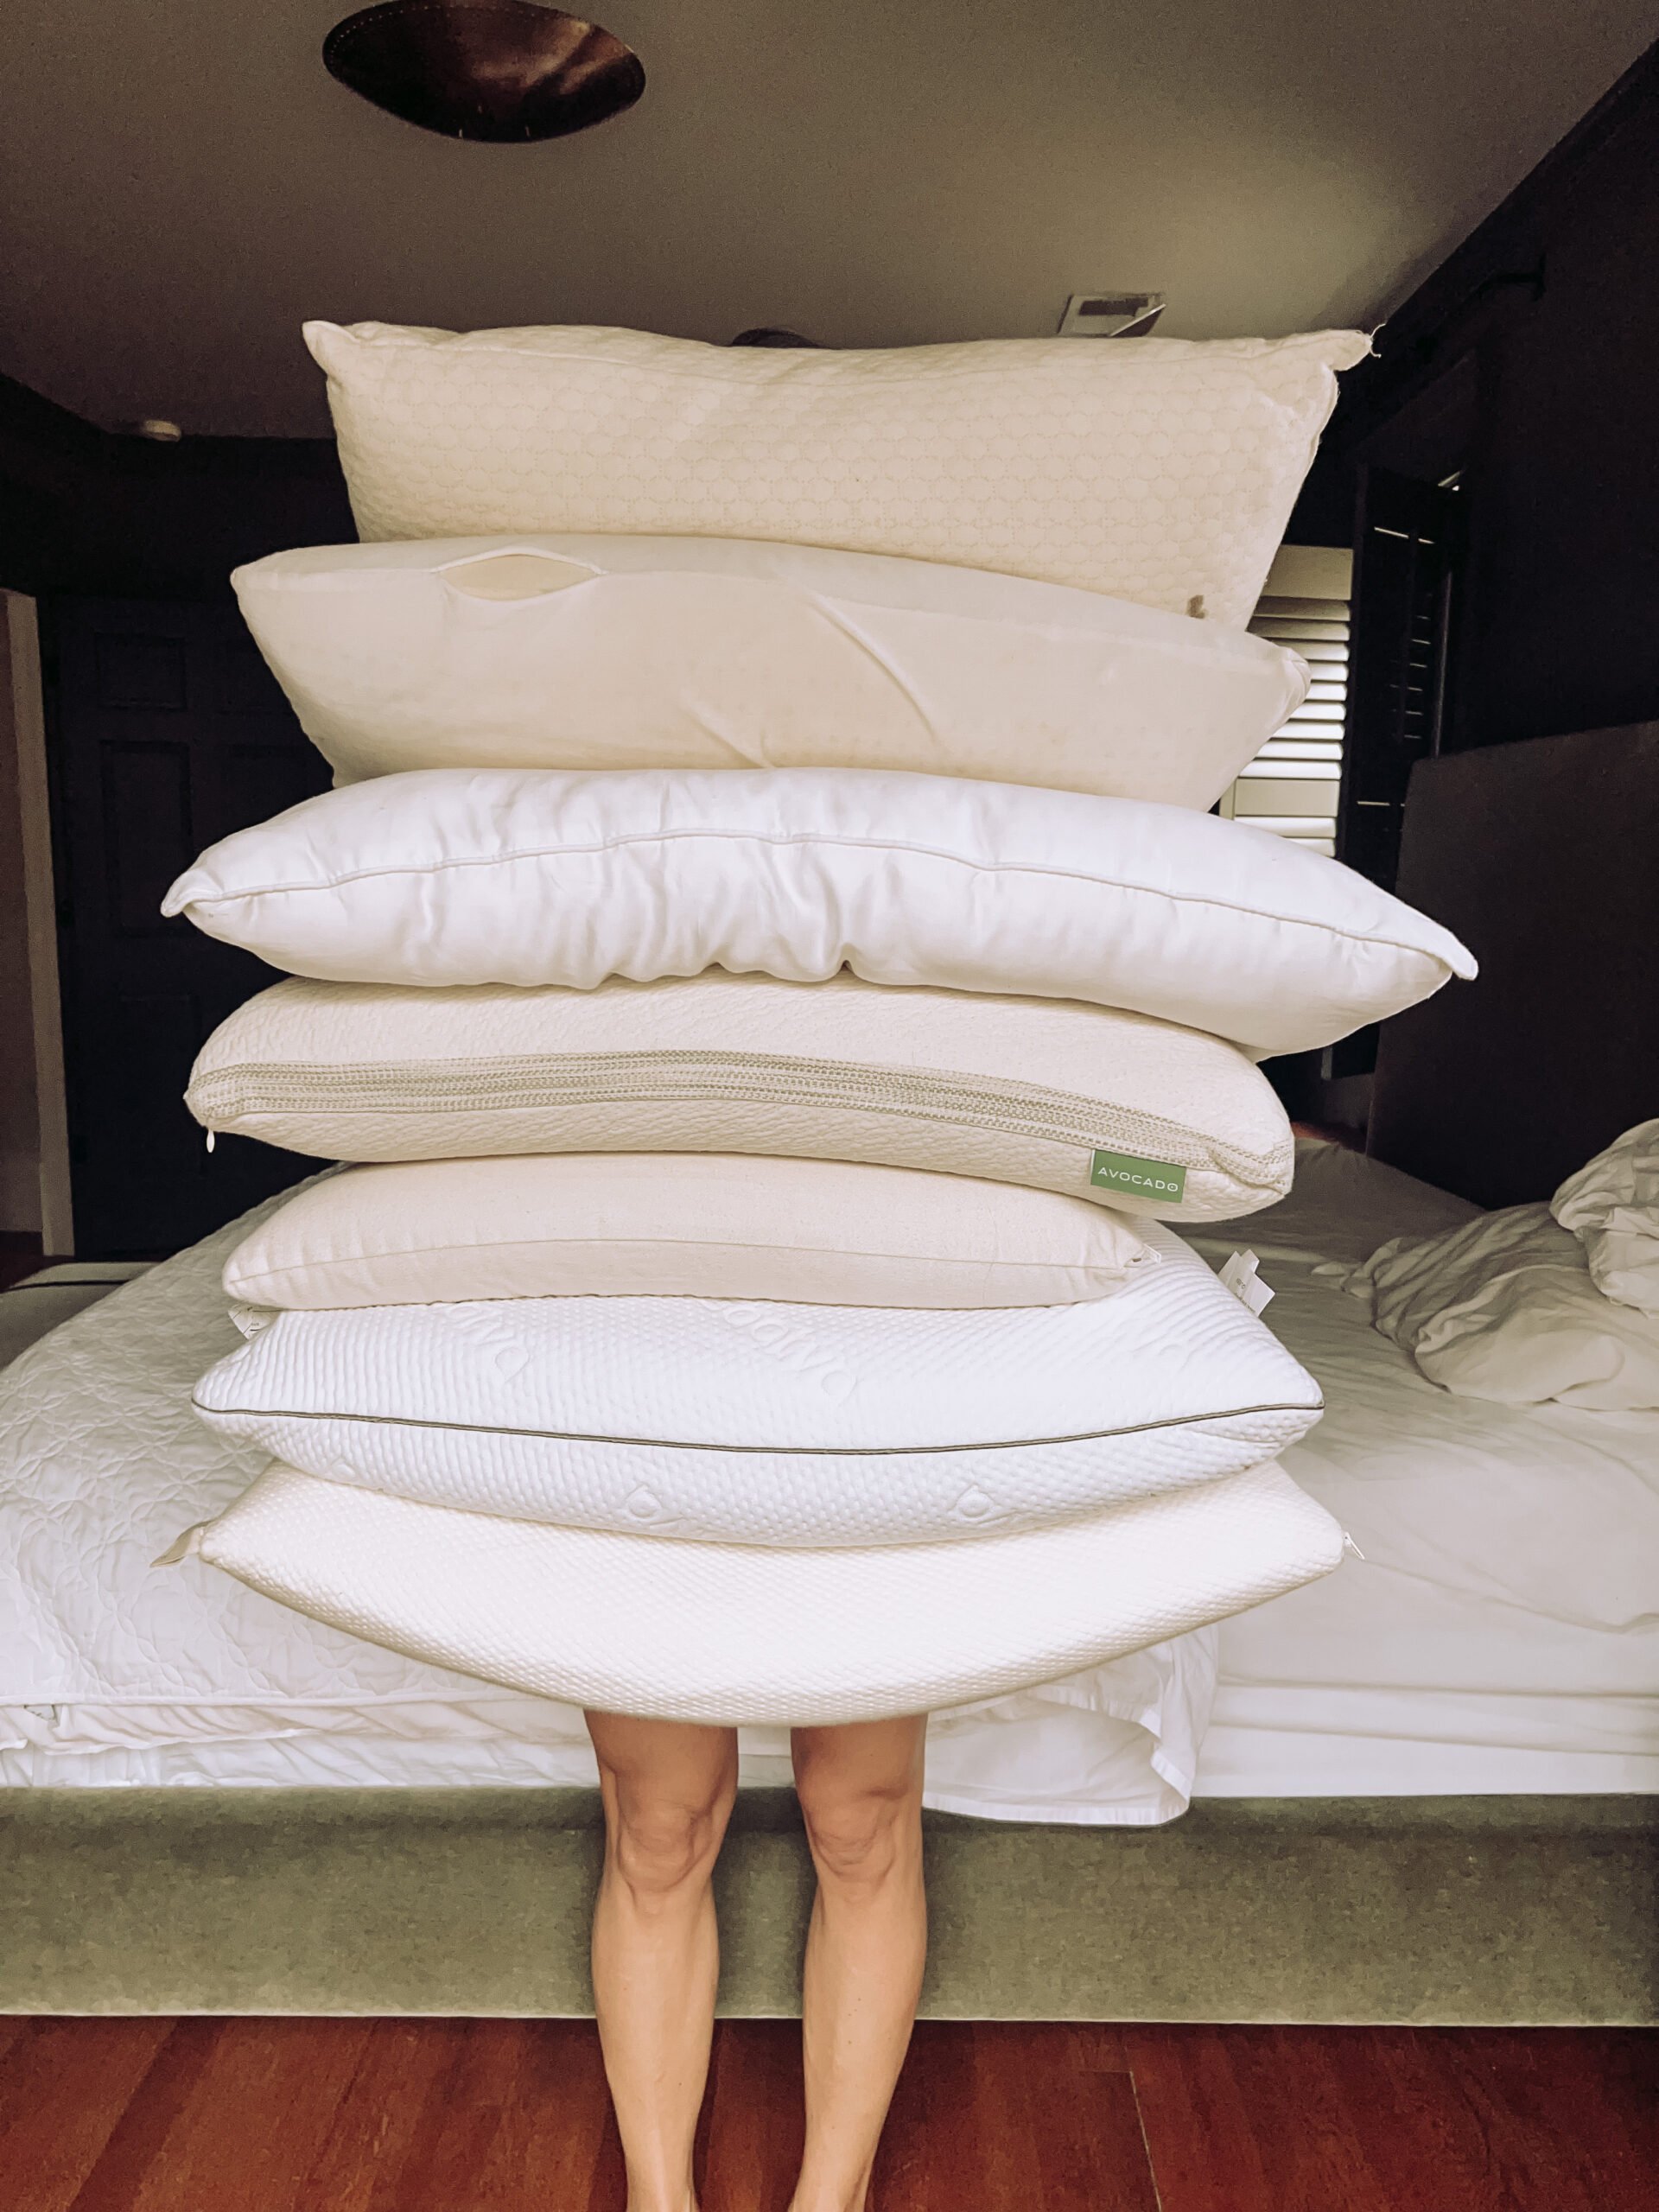 A stack of pillows is held up in front a person with only their legs visible.